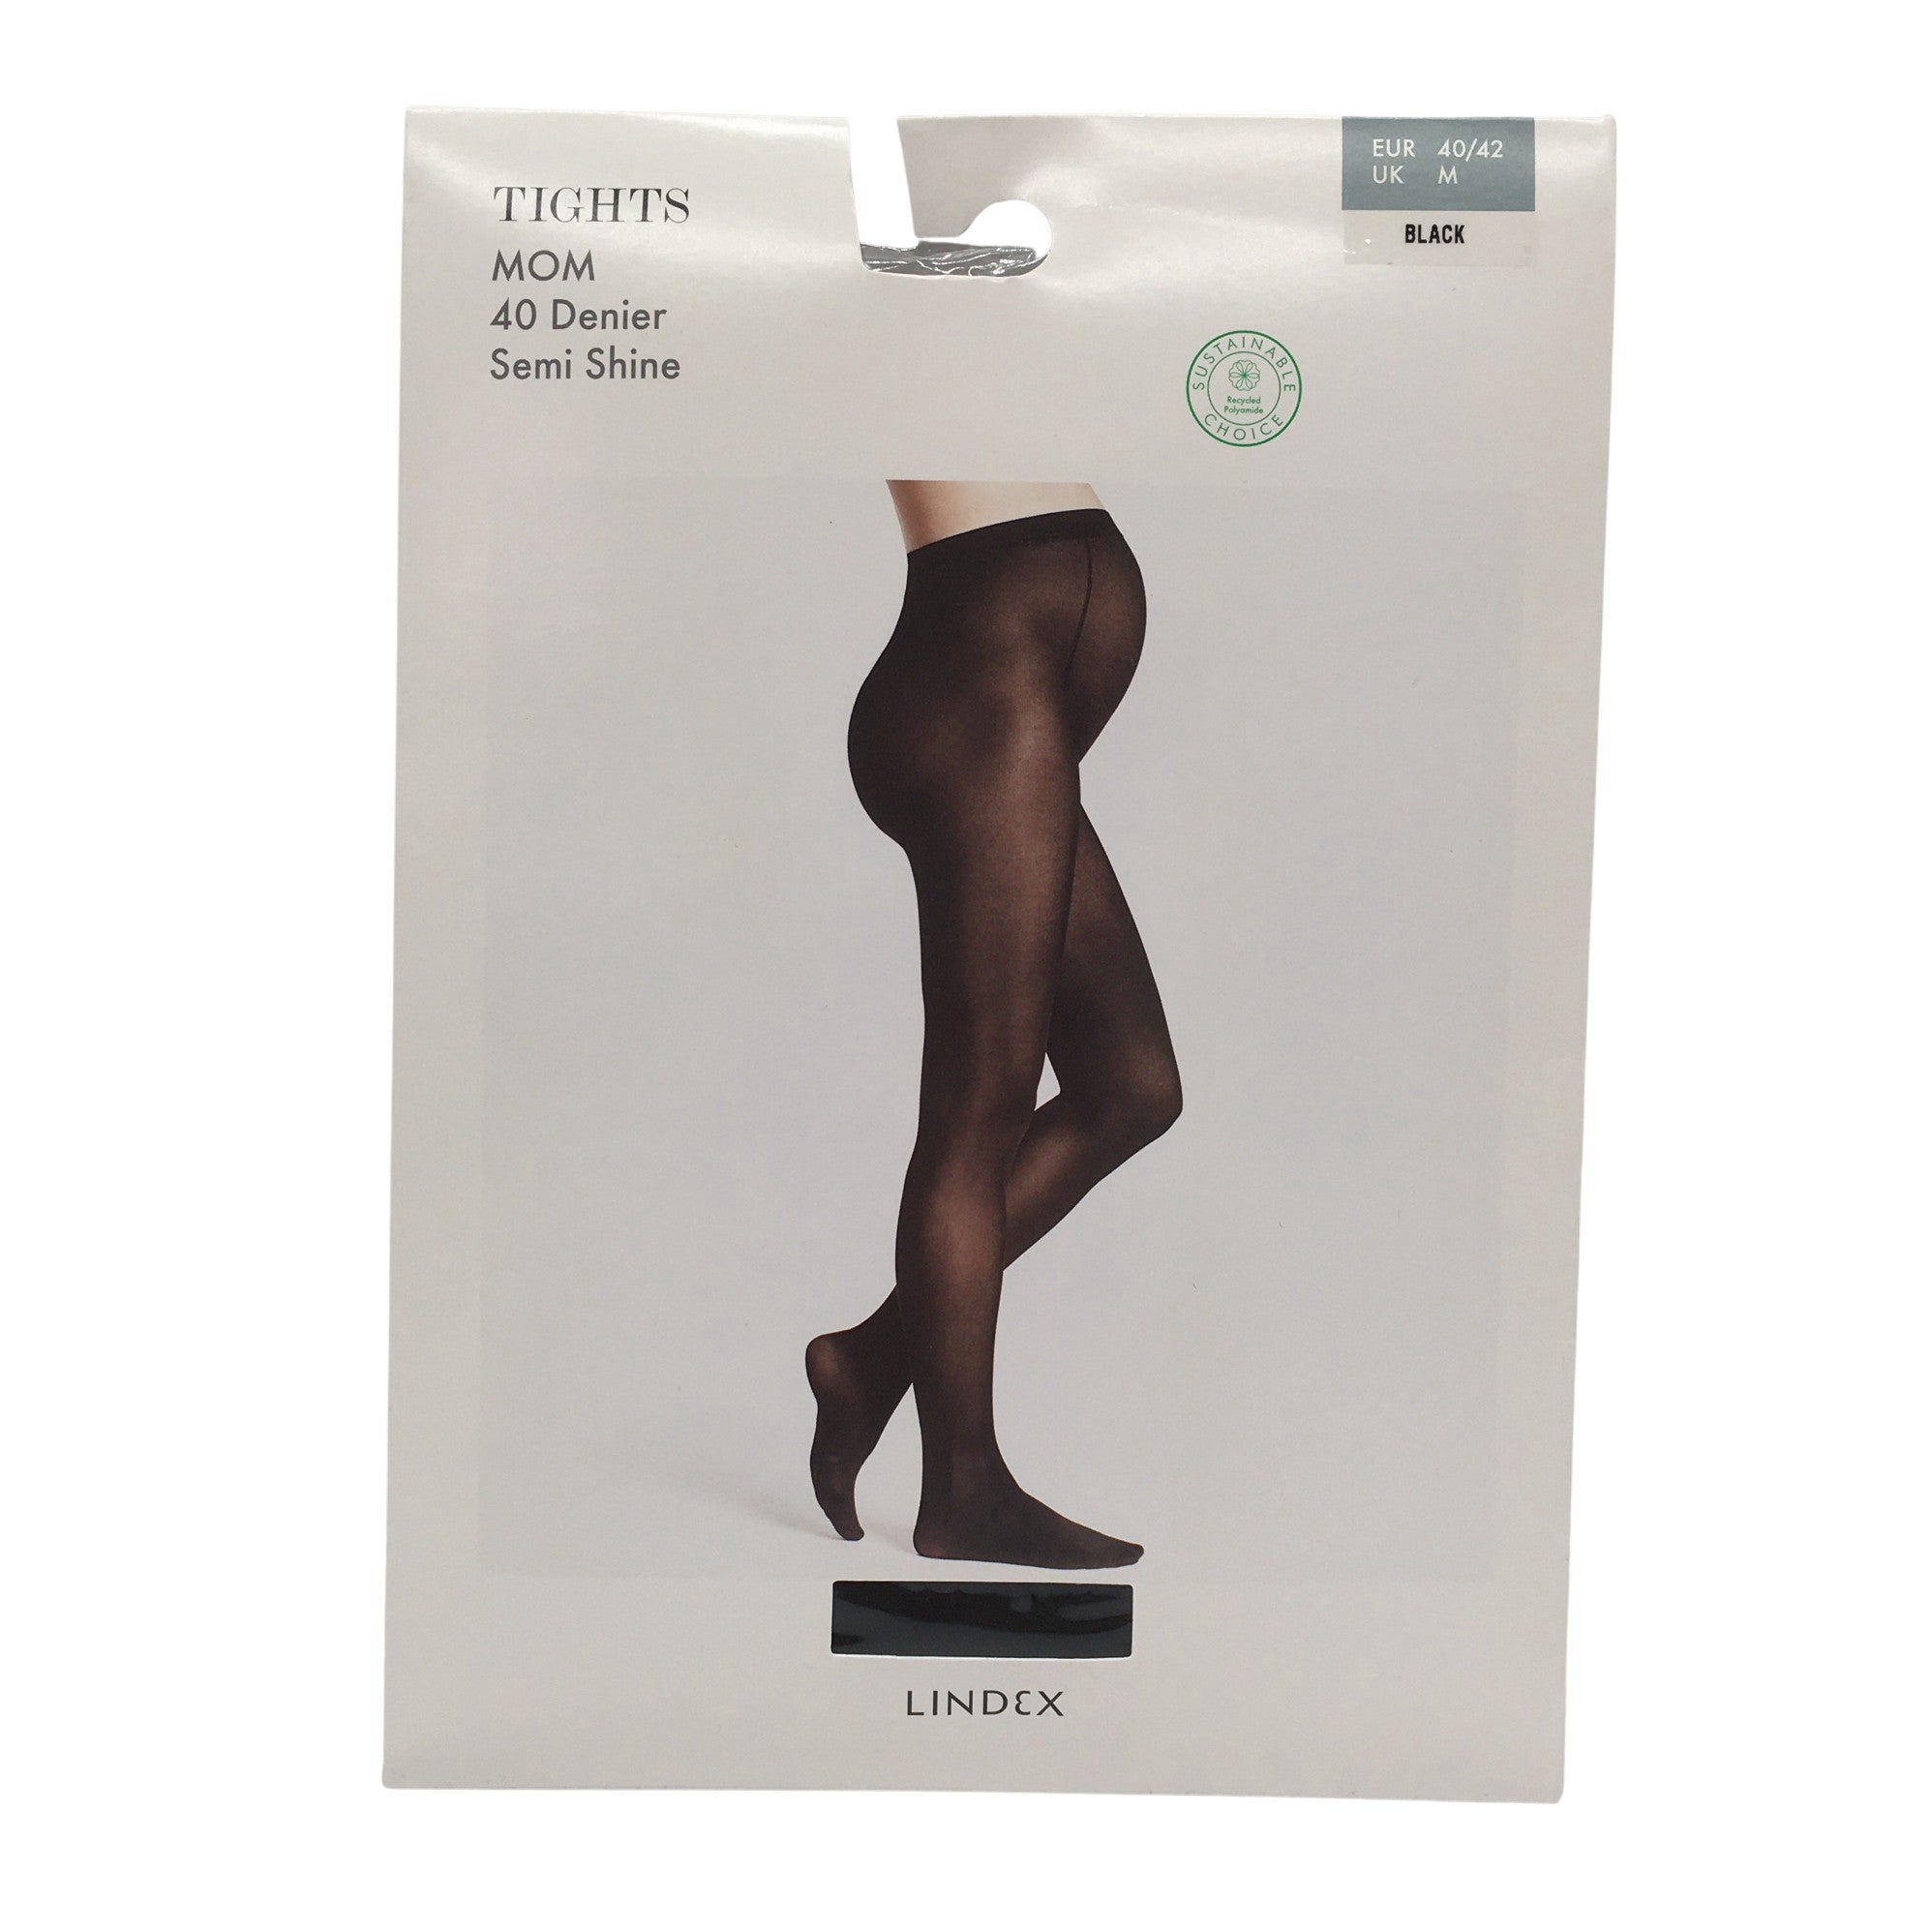 Women's Mom by Lindex Stockings, ohuet, size 40 (Black)